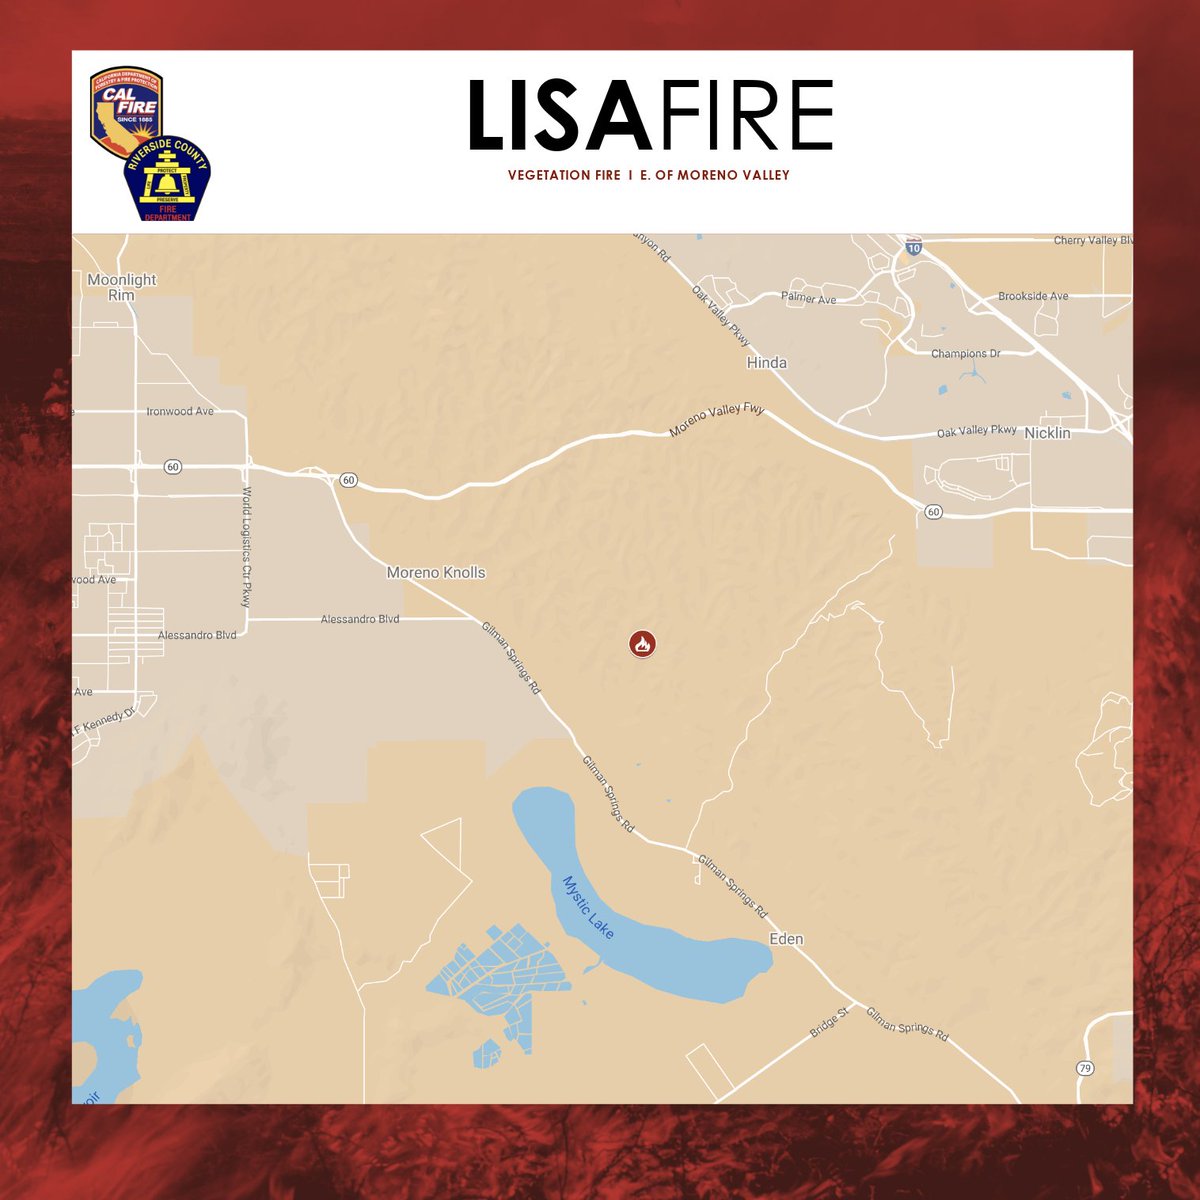 Vegetation Fire   Gilman Springs Road X Alessandro Boulevard, east of Moreno Valley. 77 acre fire burning in an area that is difficult for ground units to access. Additional aircraft have been requested. No injuries or evacuations reported